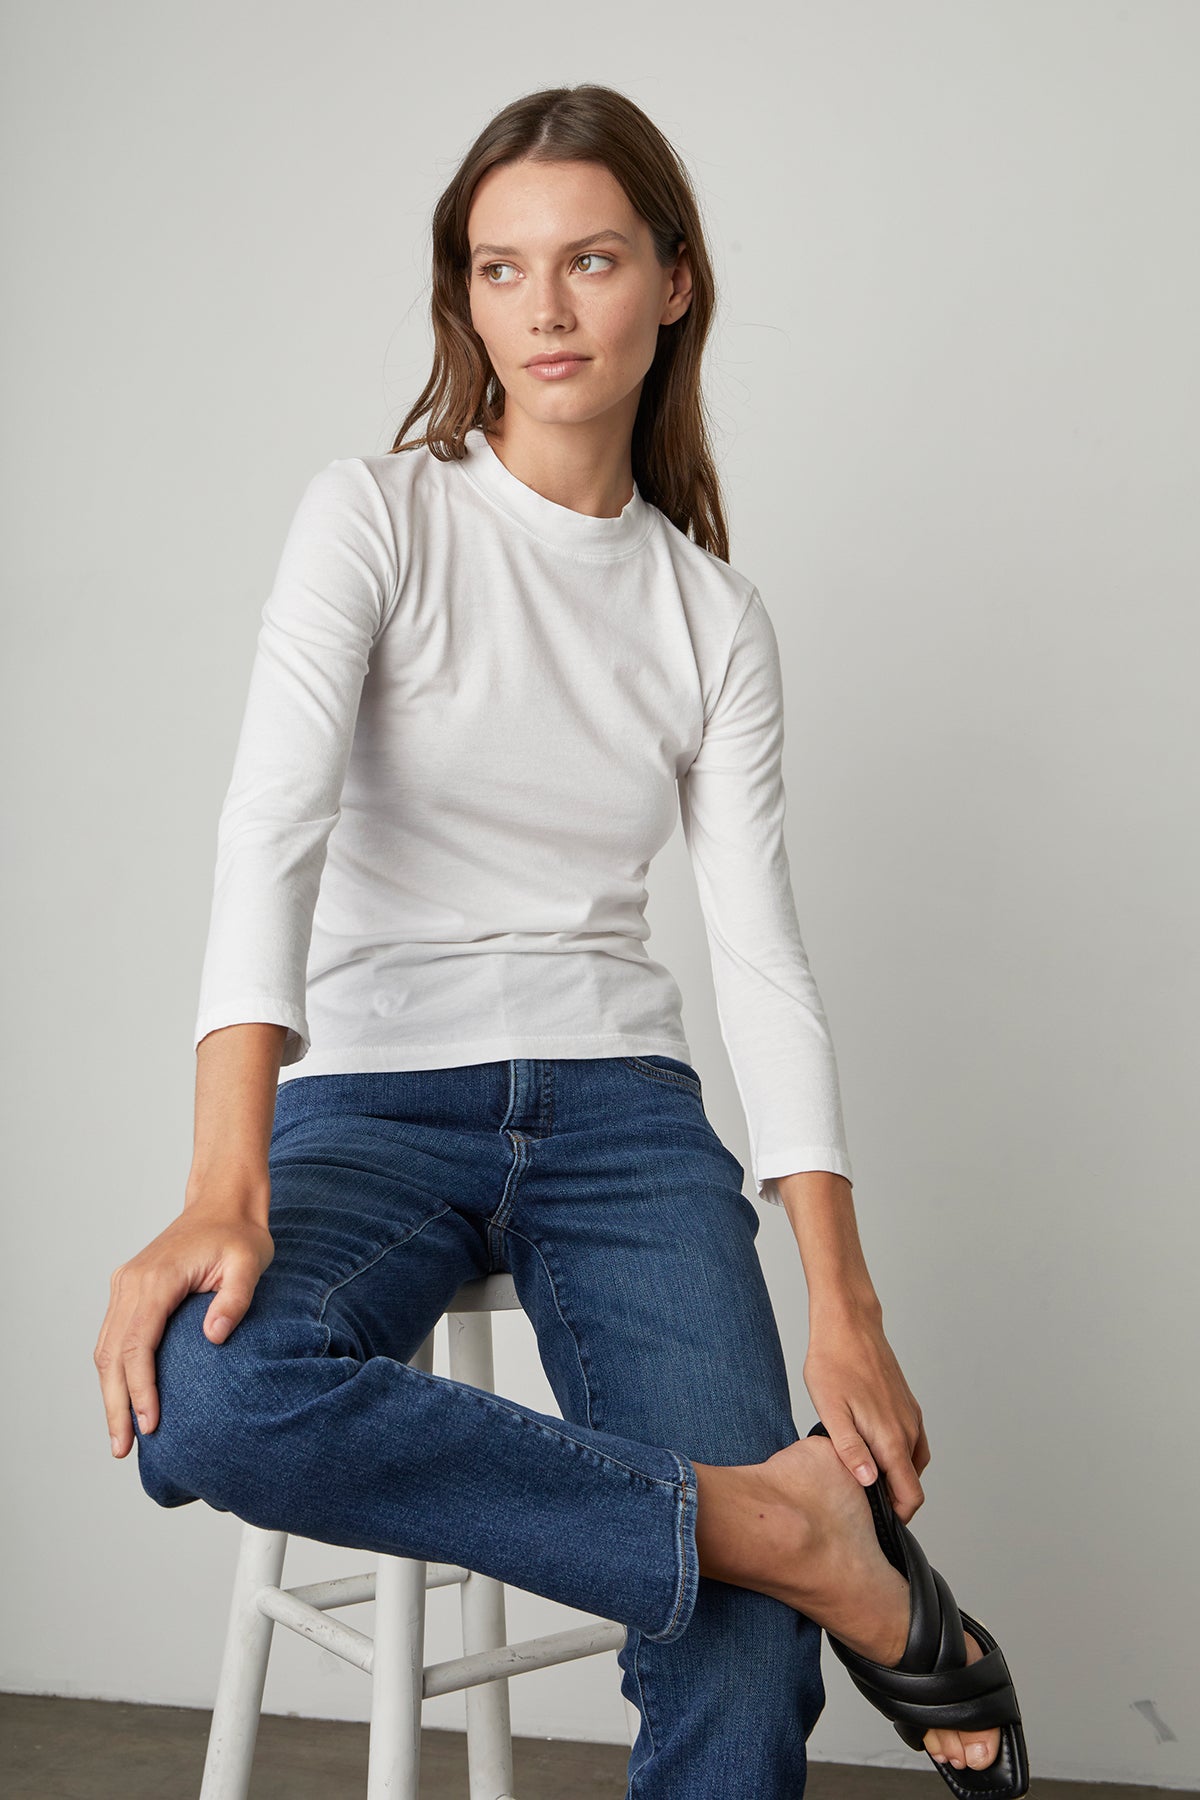 A woman in Los Angeles is sitting on a stool wearing Velvet by Graham & Spencer's VICTORIA HI RISE STRAIGHT LEG JEAN and a white t-shirt.-23514539000001